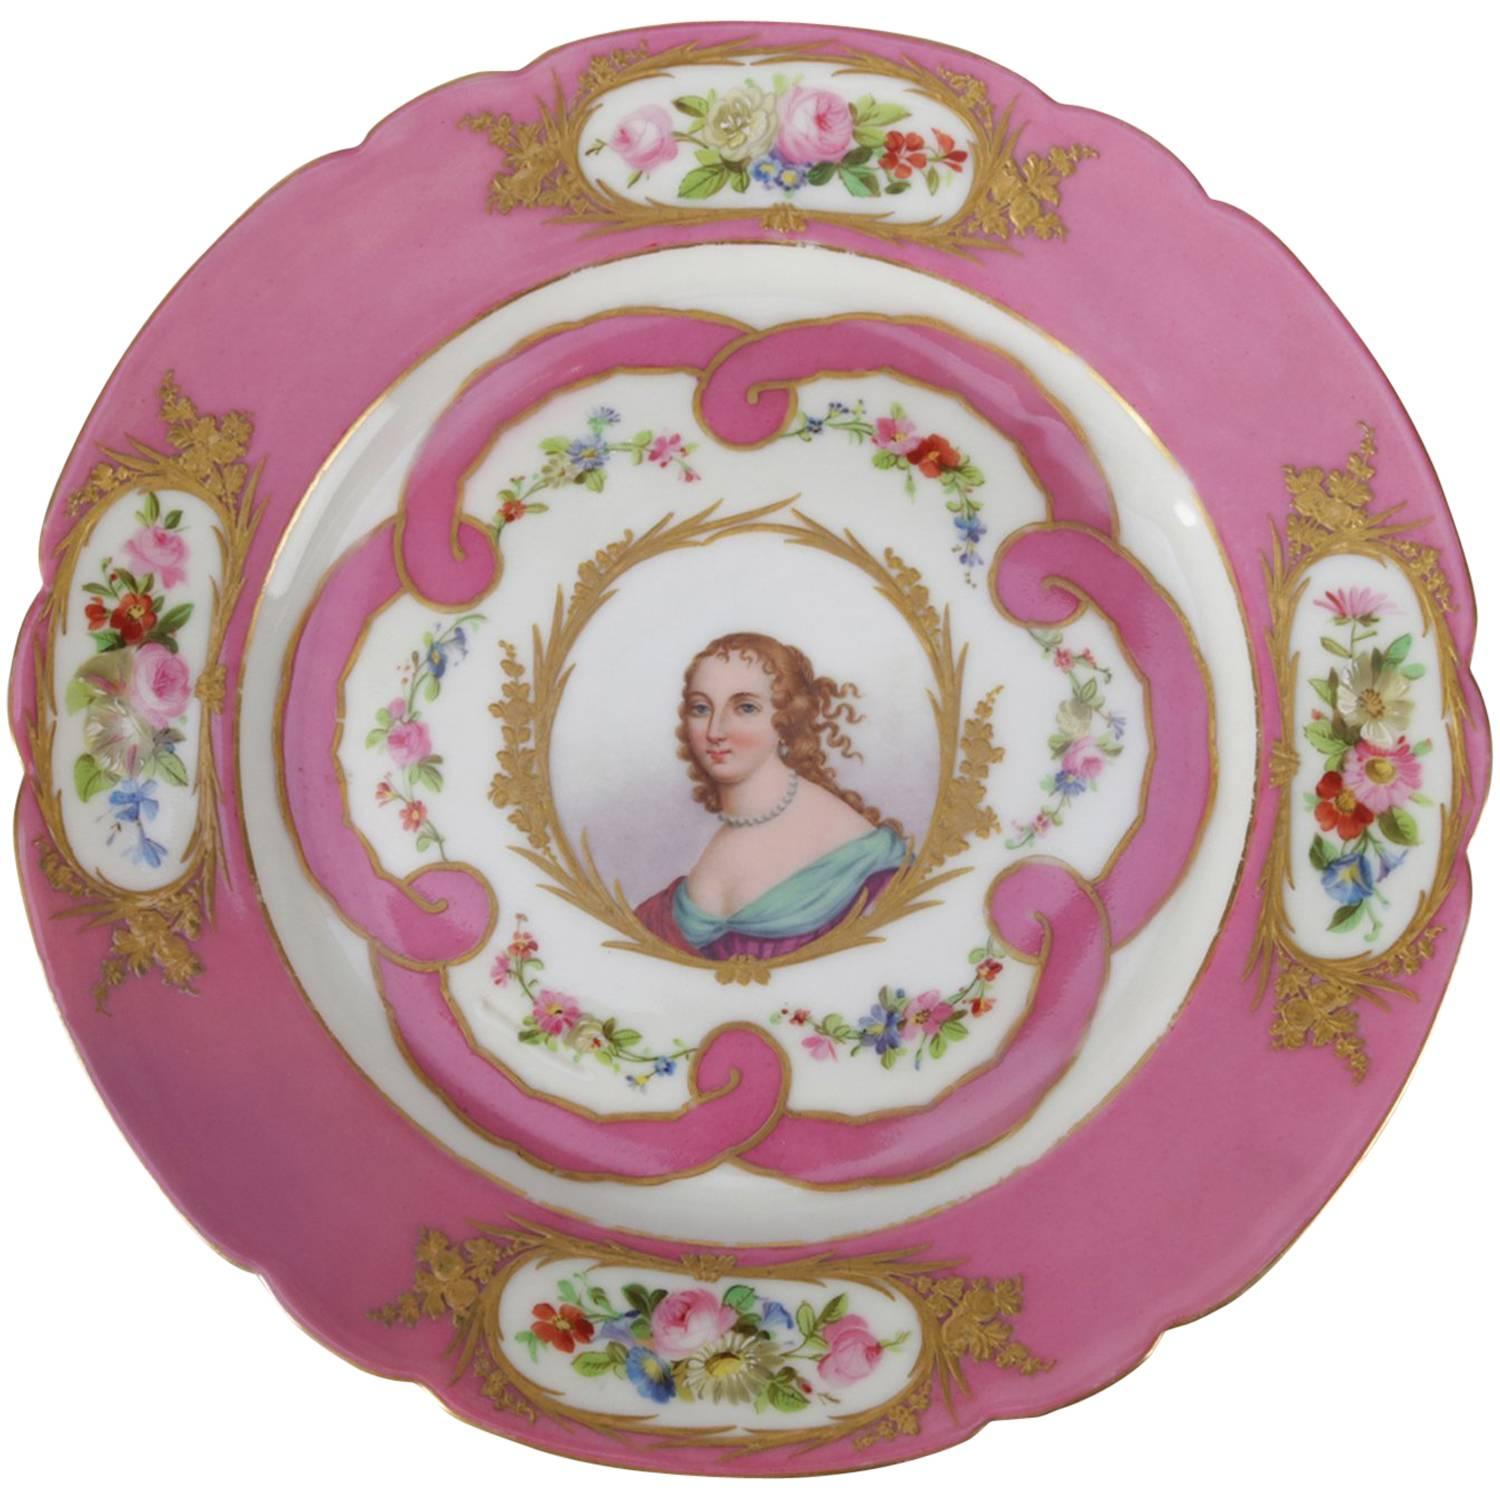 Antique French Sevres Hand-Painted and Gilt Porcelain Signed Portrait Plate